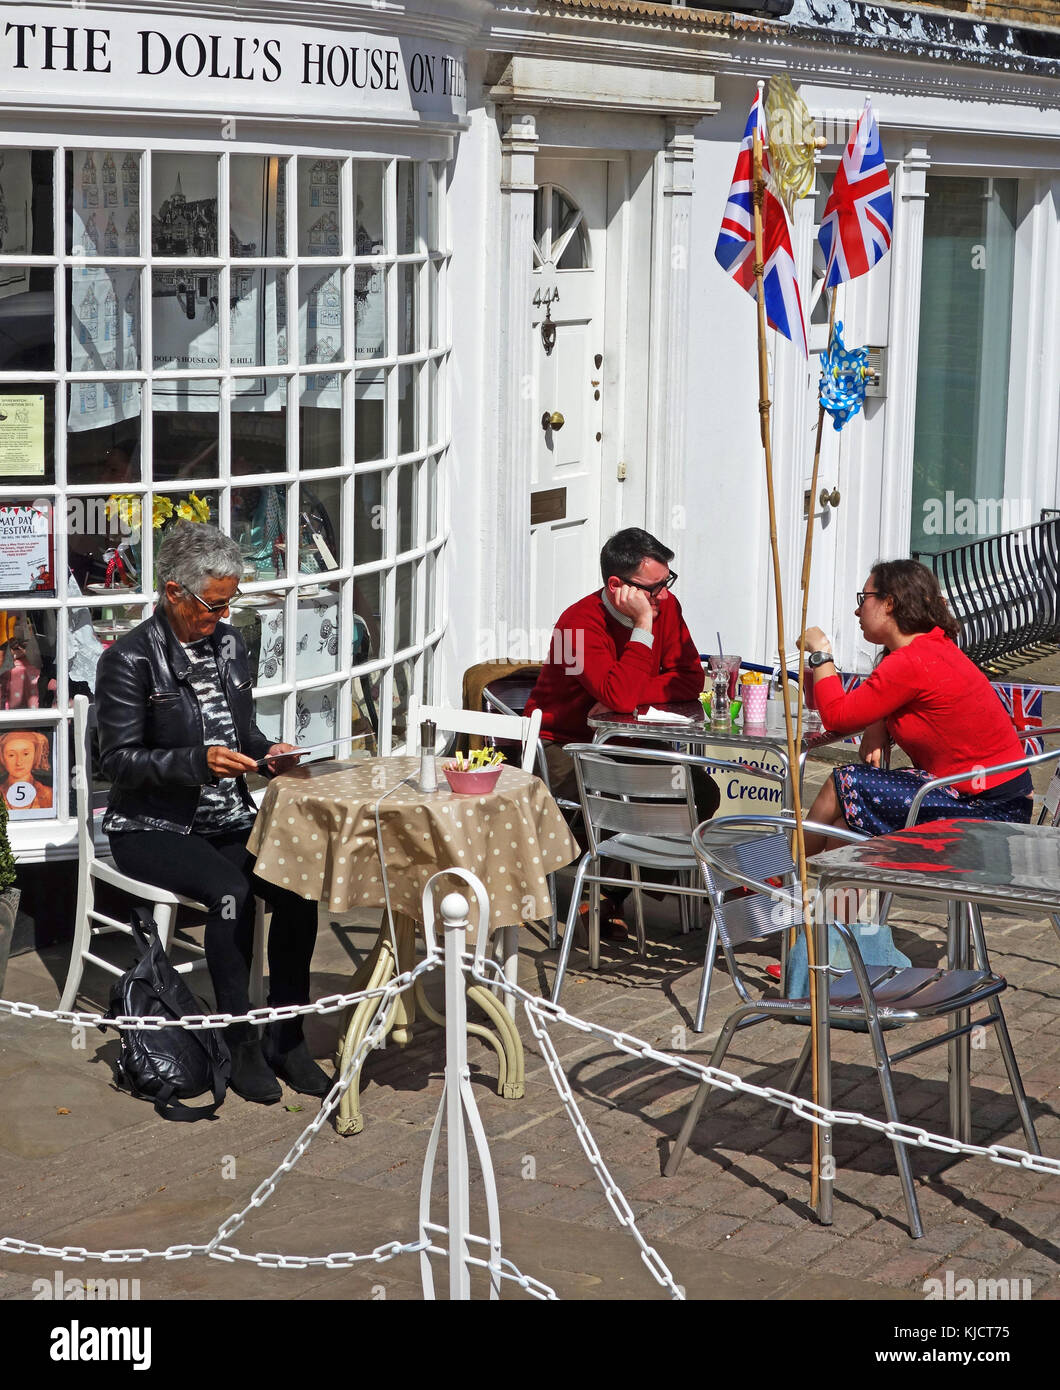 customers seated outside a street cafe in harrow, london, england, uk, Stock Photo